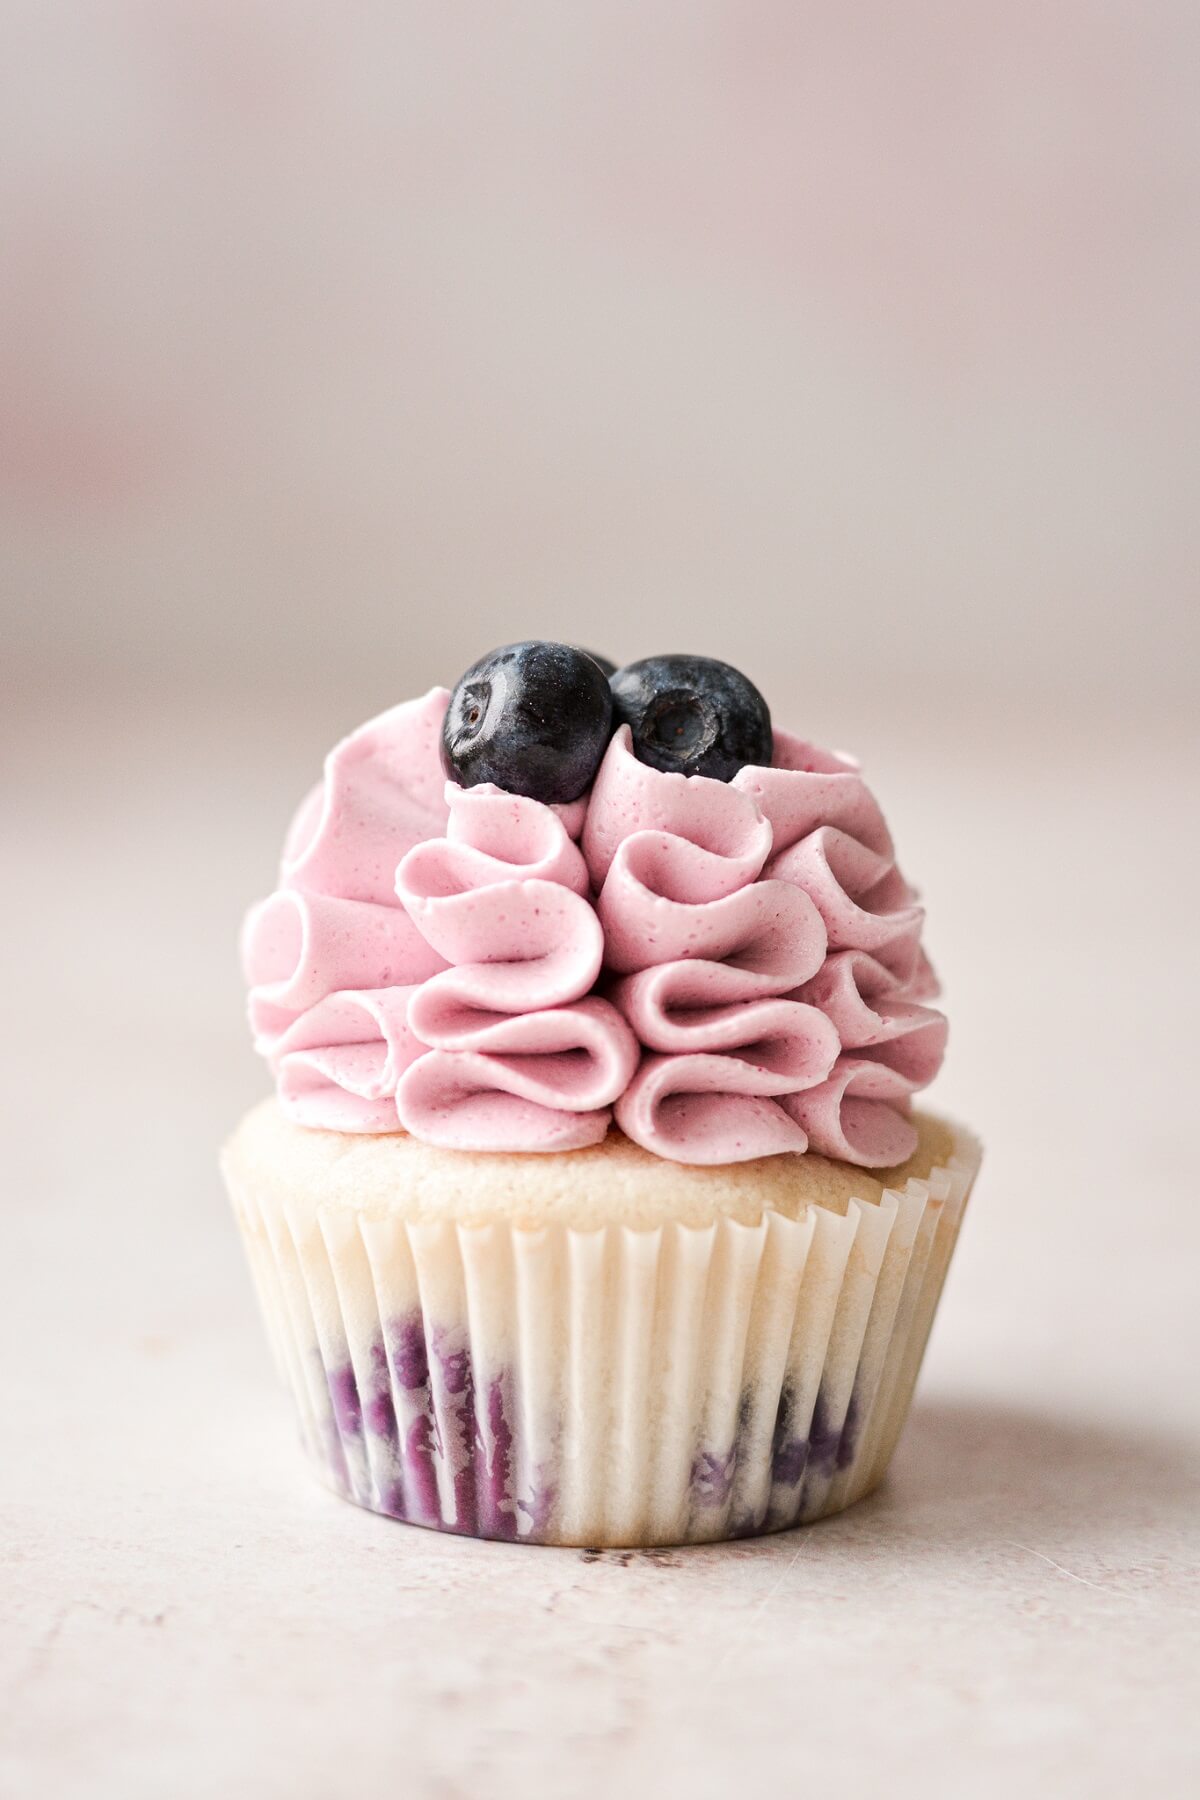 A blueberry cupcake with ruffled buttercream.